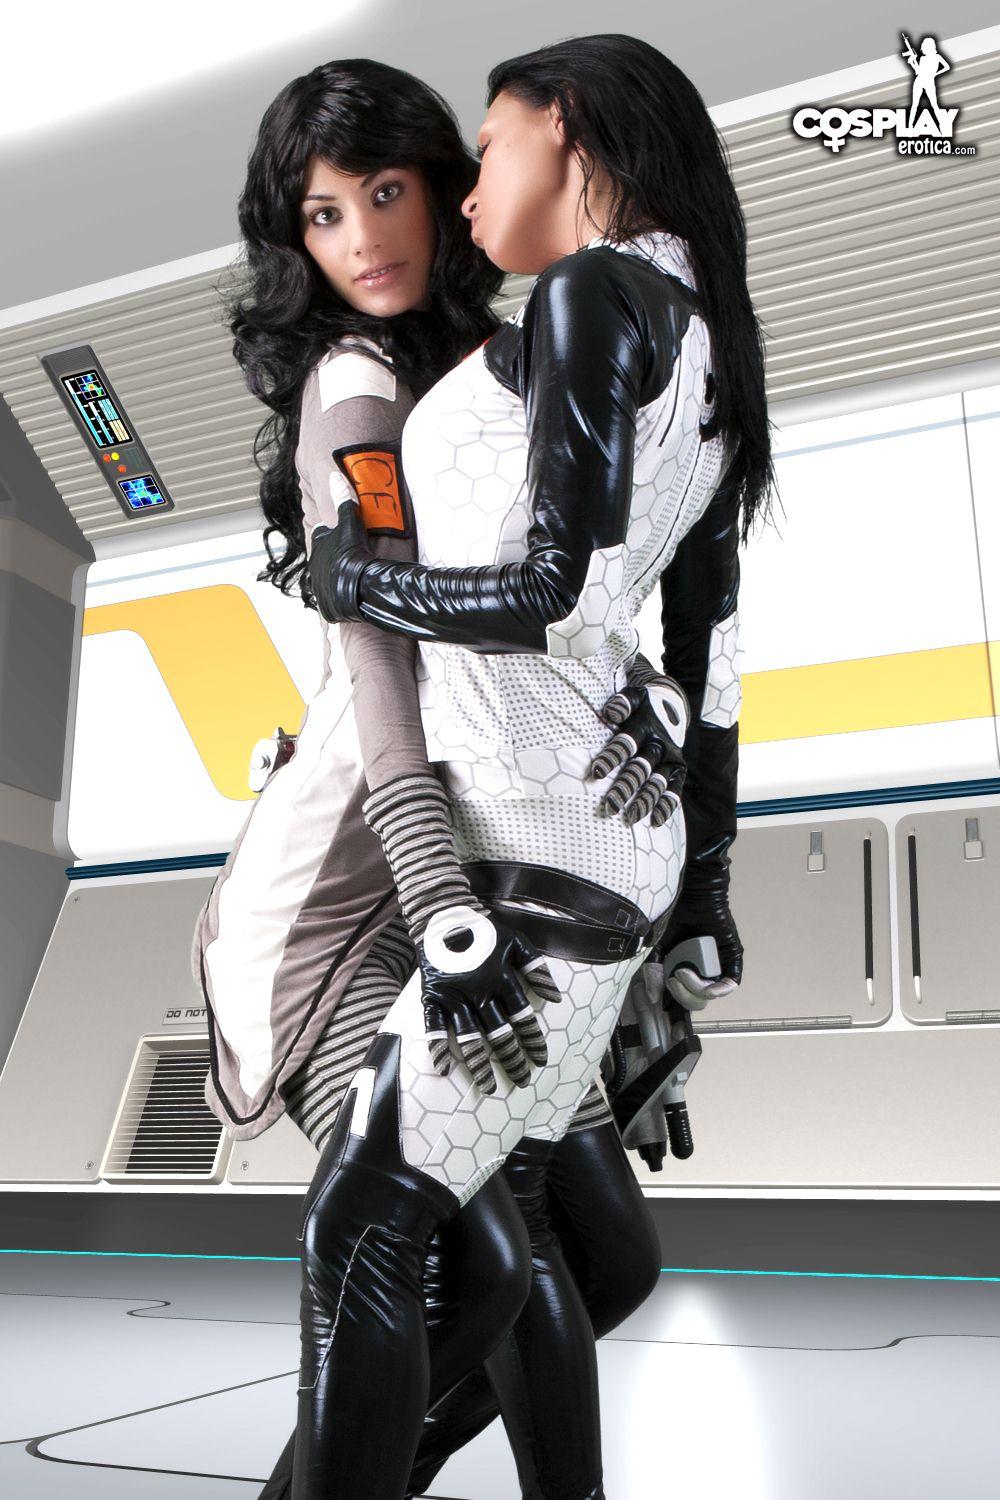 Pictures of Mea Lee and Marylin doing some hot Mass Effect cosplay #59427817